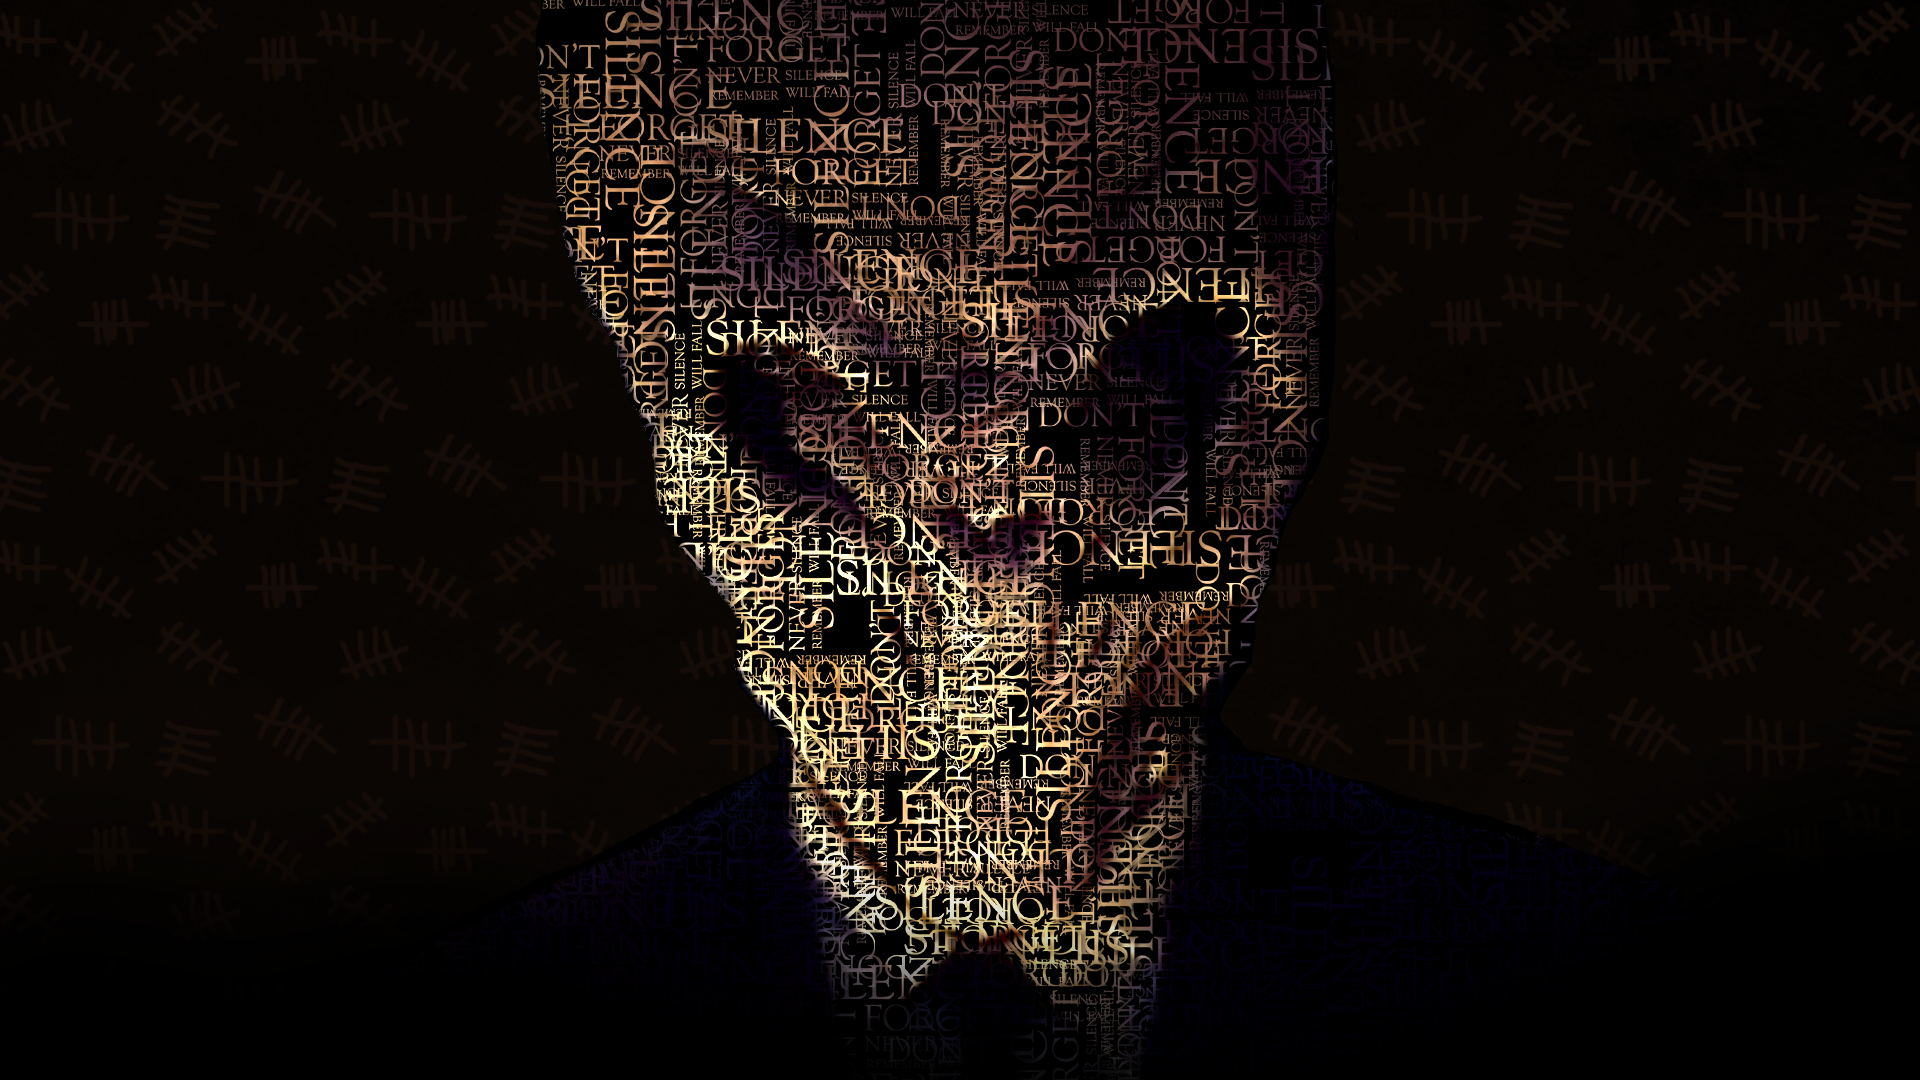 The Silence (Doctor Who) by Nicknufayl on DeviantArt